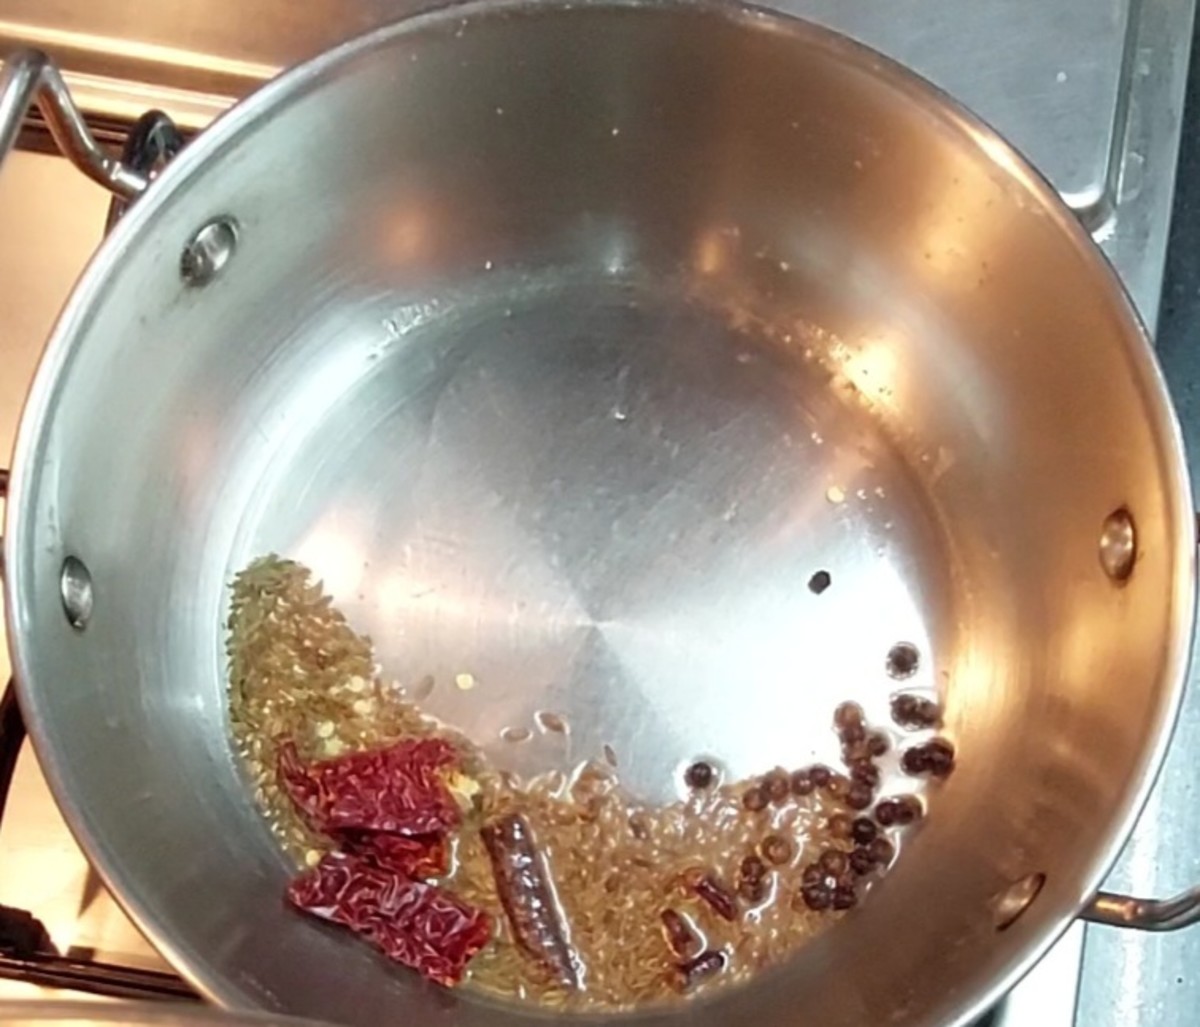 In the same pan, heat 1 tablespoon oil and splutter 1 teaspoon cumin seeds. Add 1/2 teaspoon black peppercorns, a 2-inch-long cinnamon stick, 2-3 cloves and 1-2 broken red chilies. Saute well.